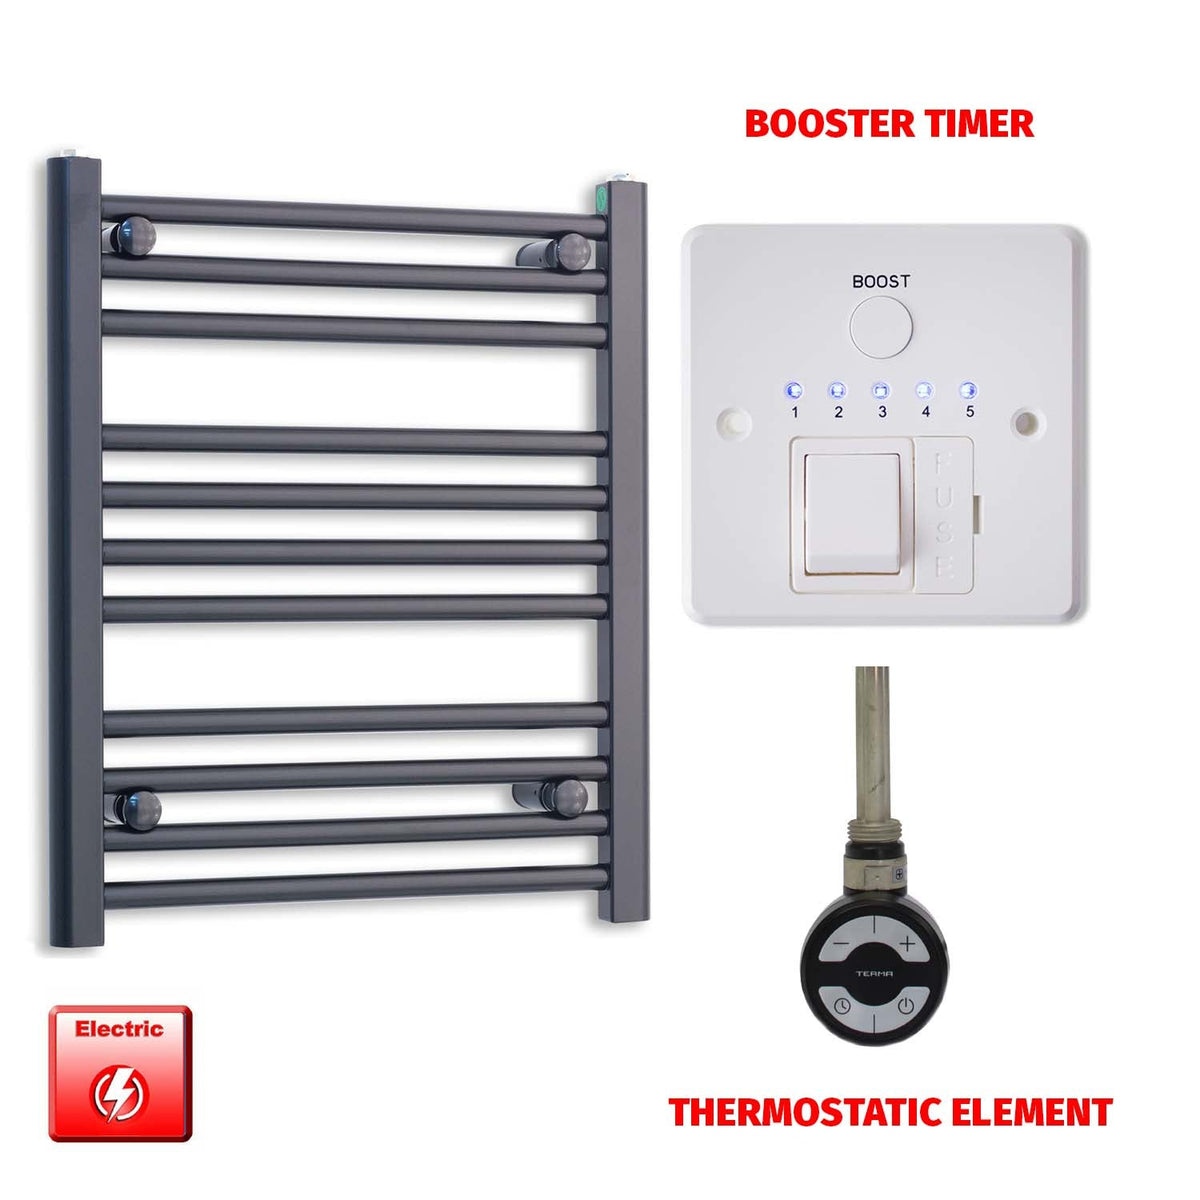 1600mm High 600mm Wide Flat Black Pre-Filled Electric Heated Towel Radiator HTR MOA Thermostatic Booster Timer